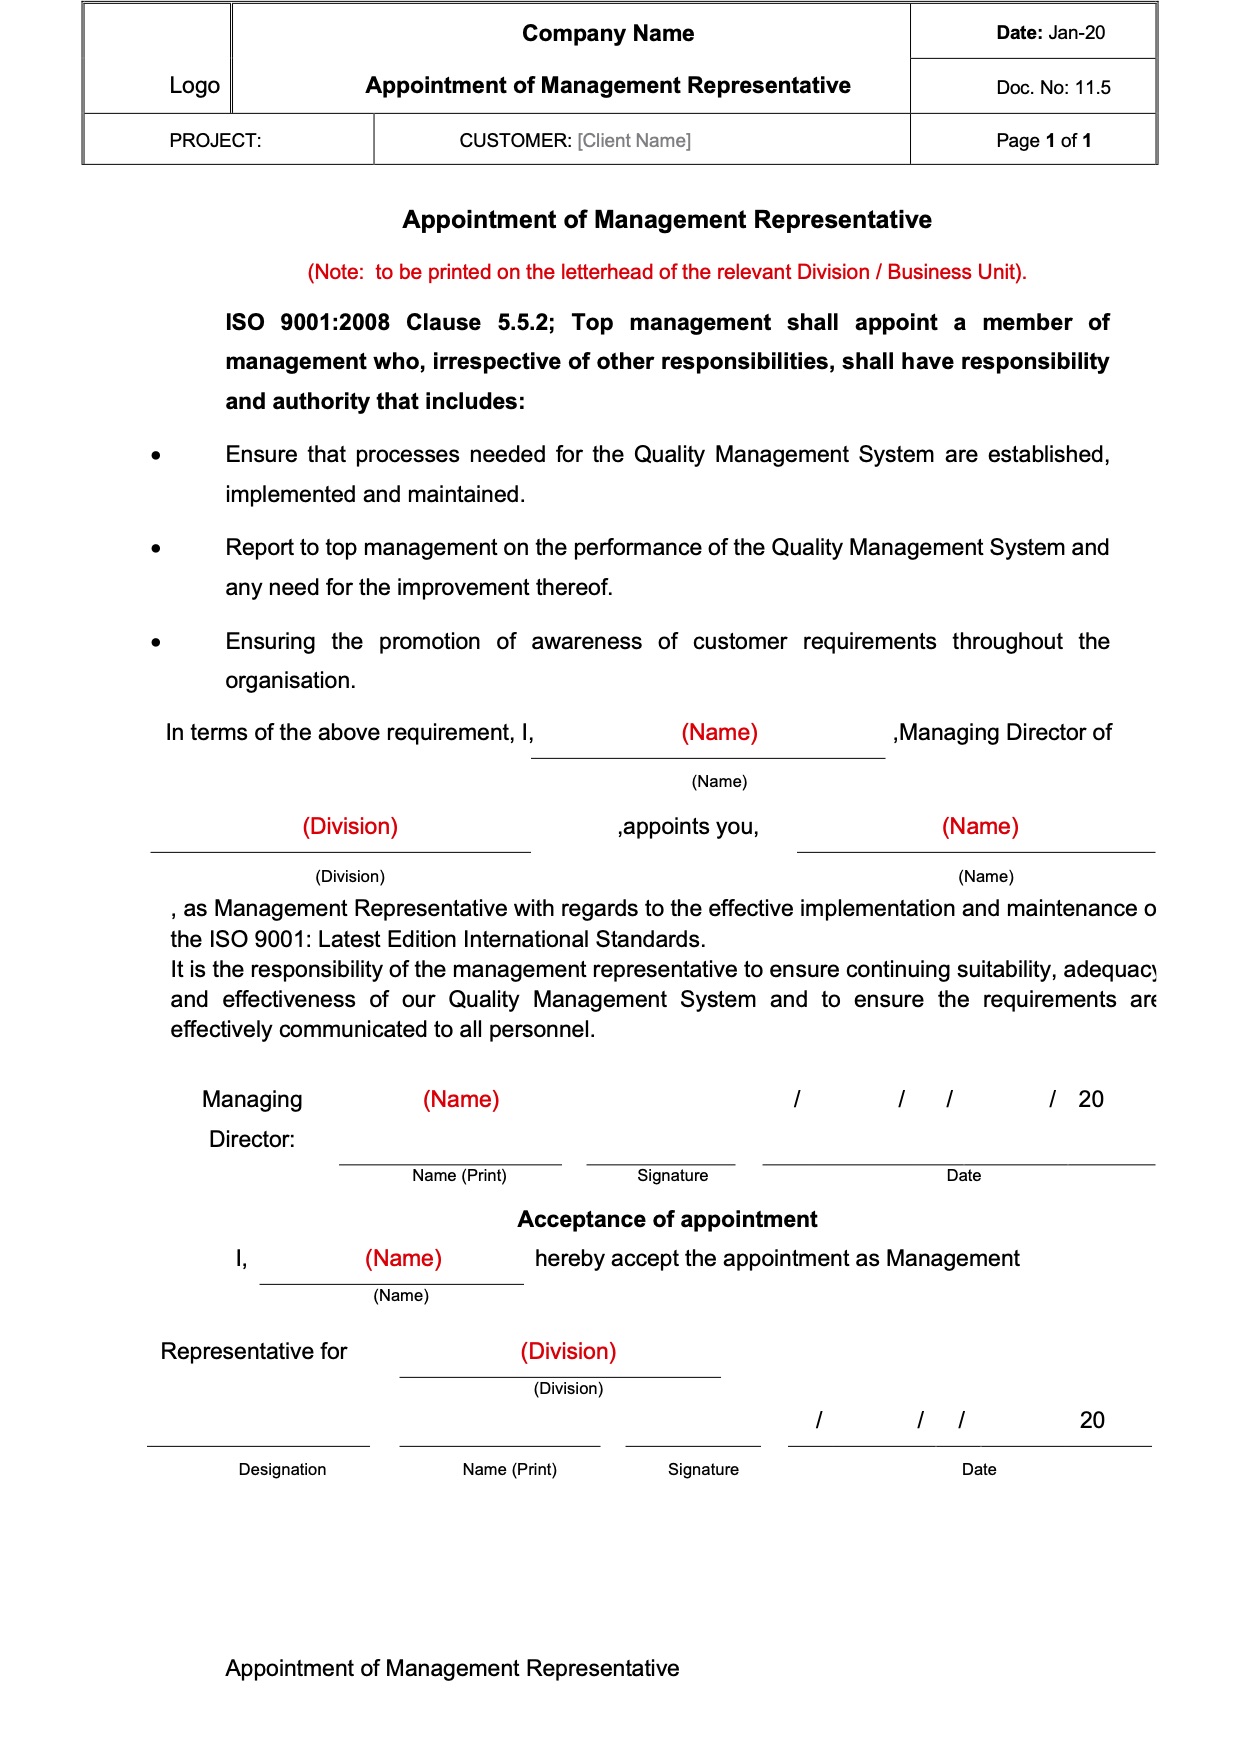 CT058 Appointment of Management Representative